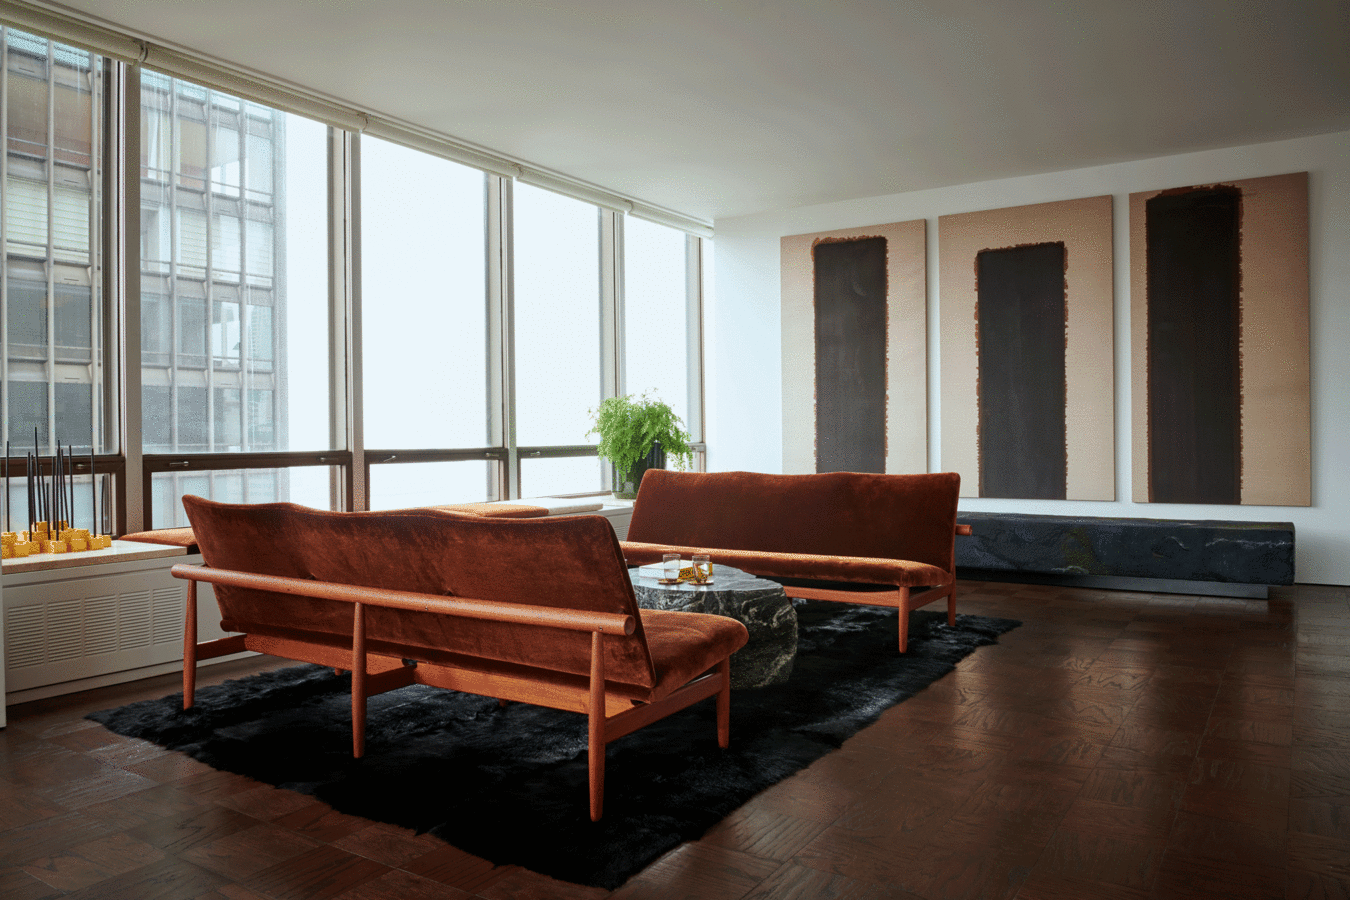 Living room with window wall, black and white triptych, wood floor, black rug and pair of wood settees with brown cushions.